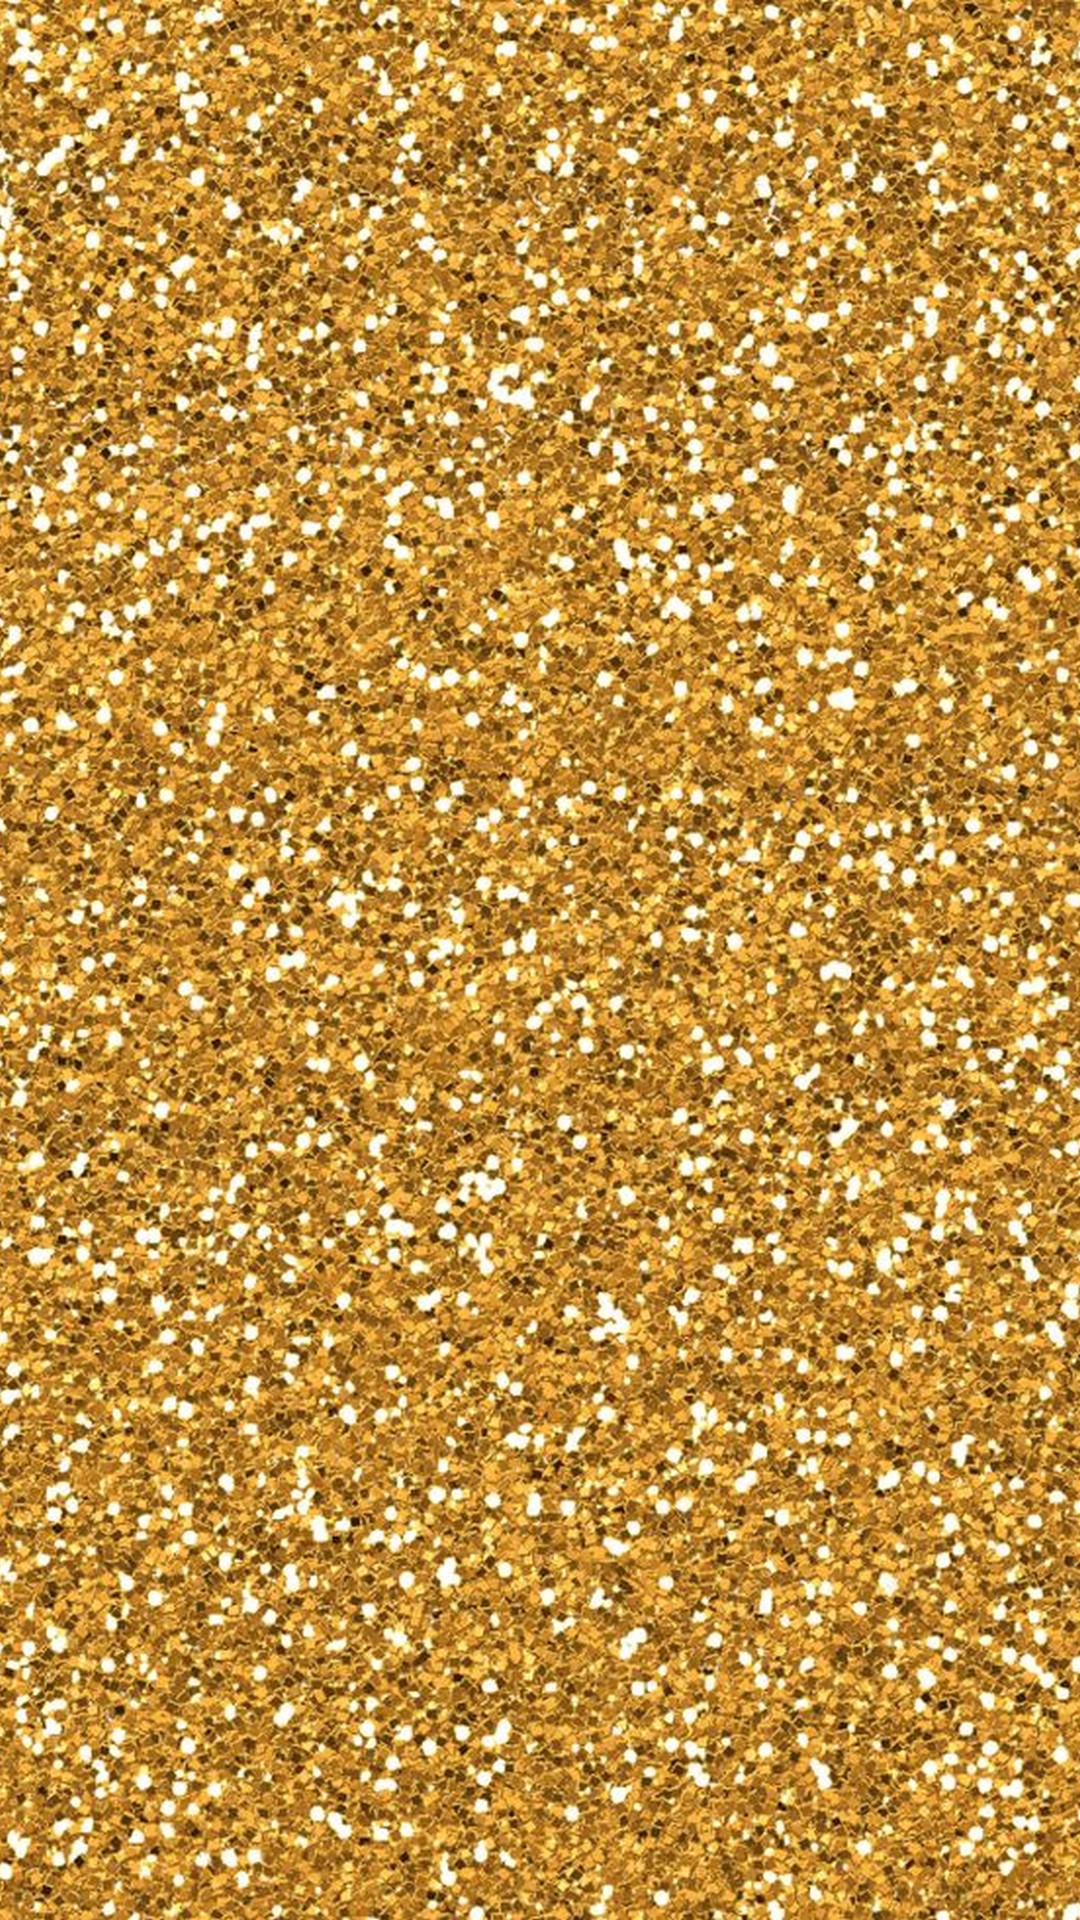 Gold Glitter Backgrounds For Android with HD resolution 1080x1920